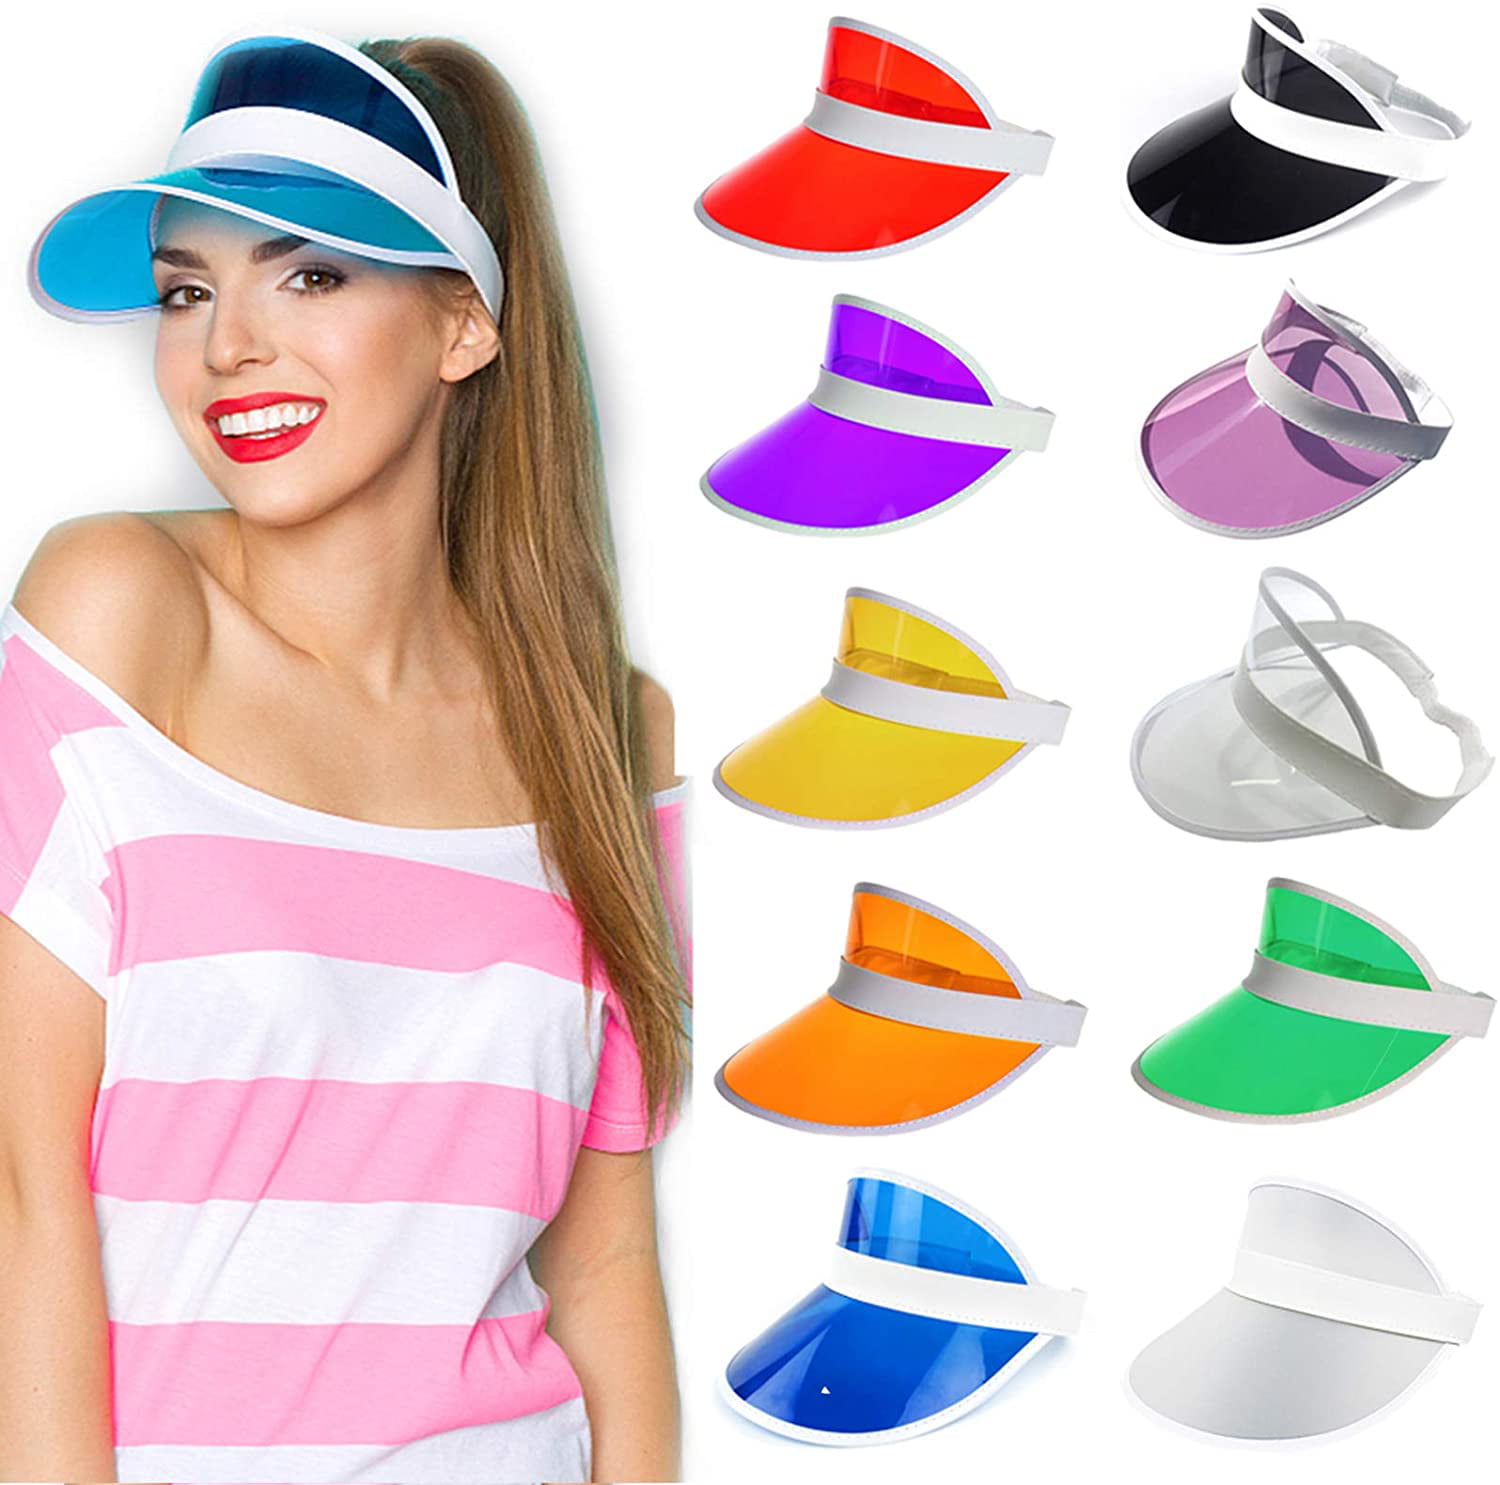 Summer Women's Hat Visor Sun Protection Candy Color Solid Casual Quality Cap New 